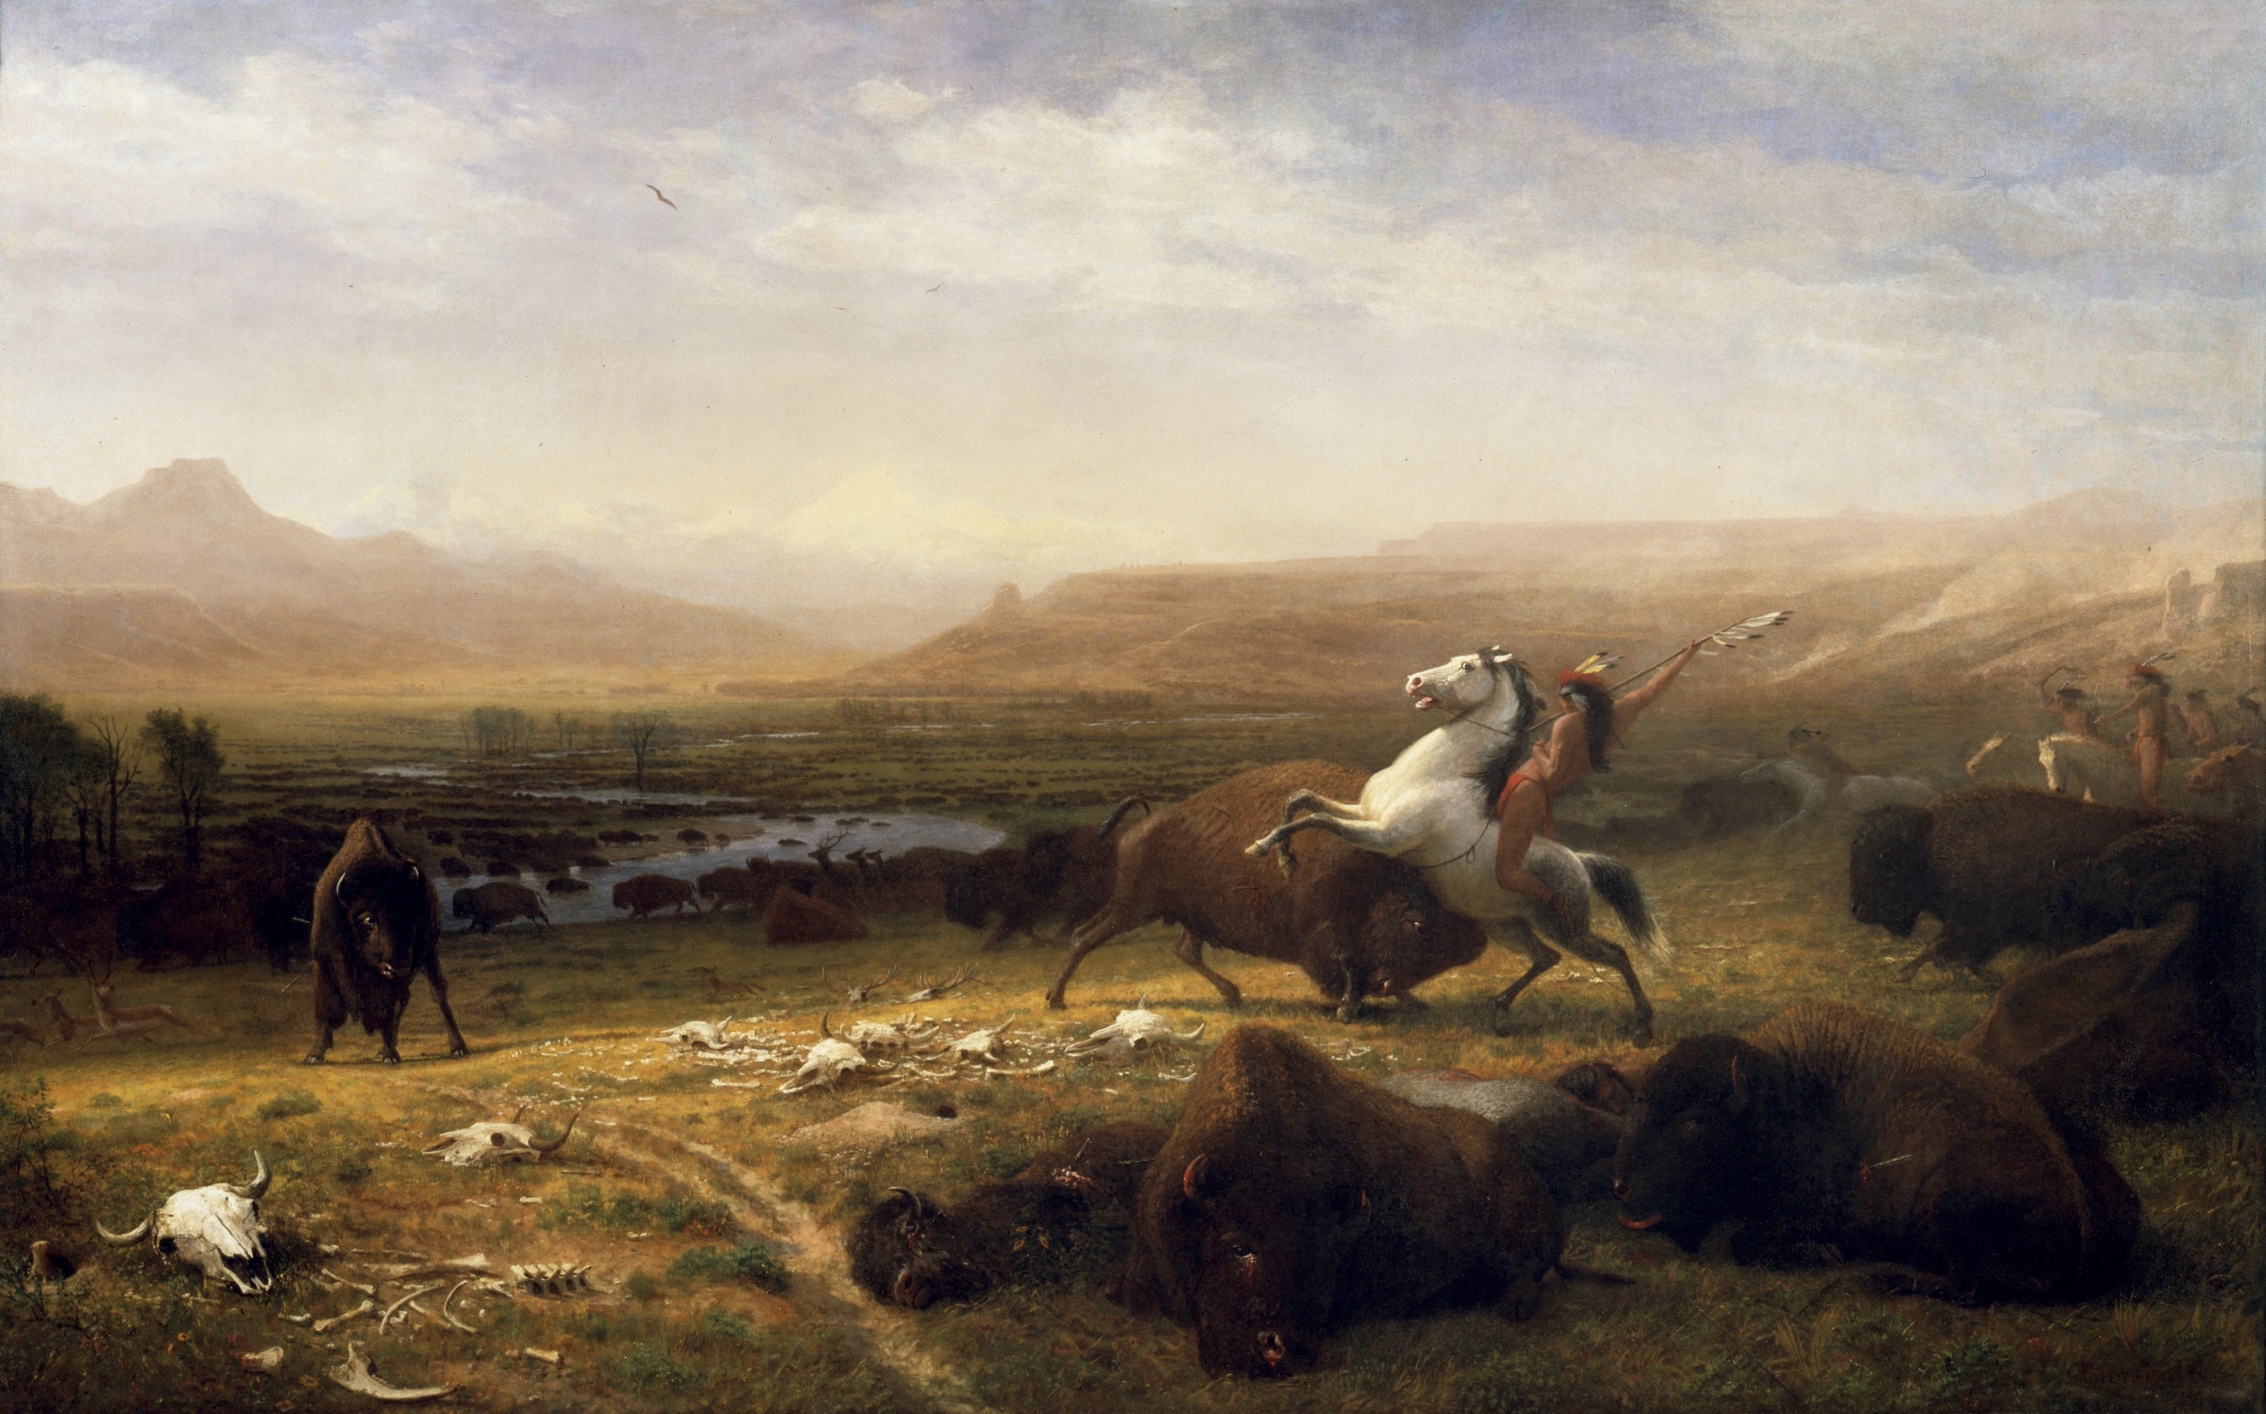 The Last of the Buffalo by Albert Bierstadt, from the collection of the Buffalo Bill Center of the West.